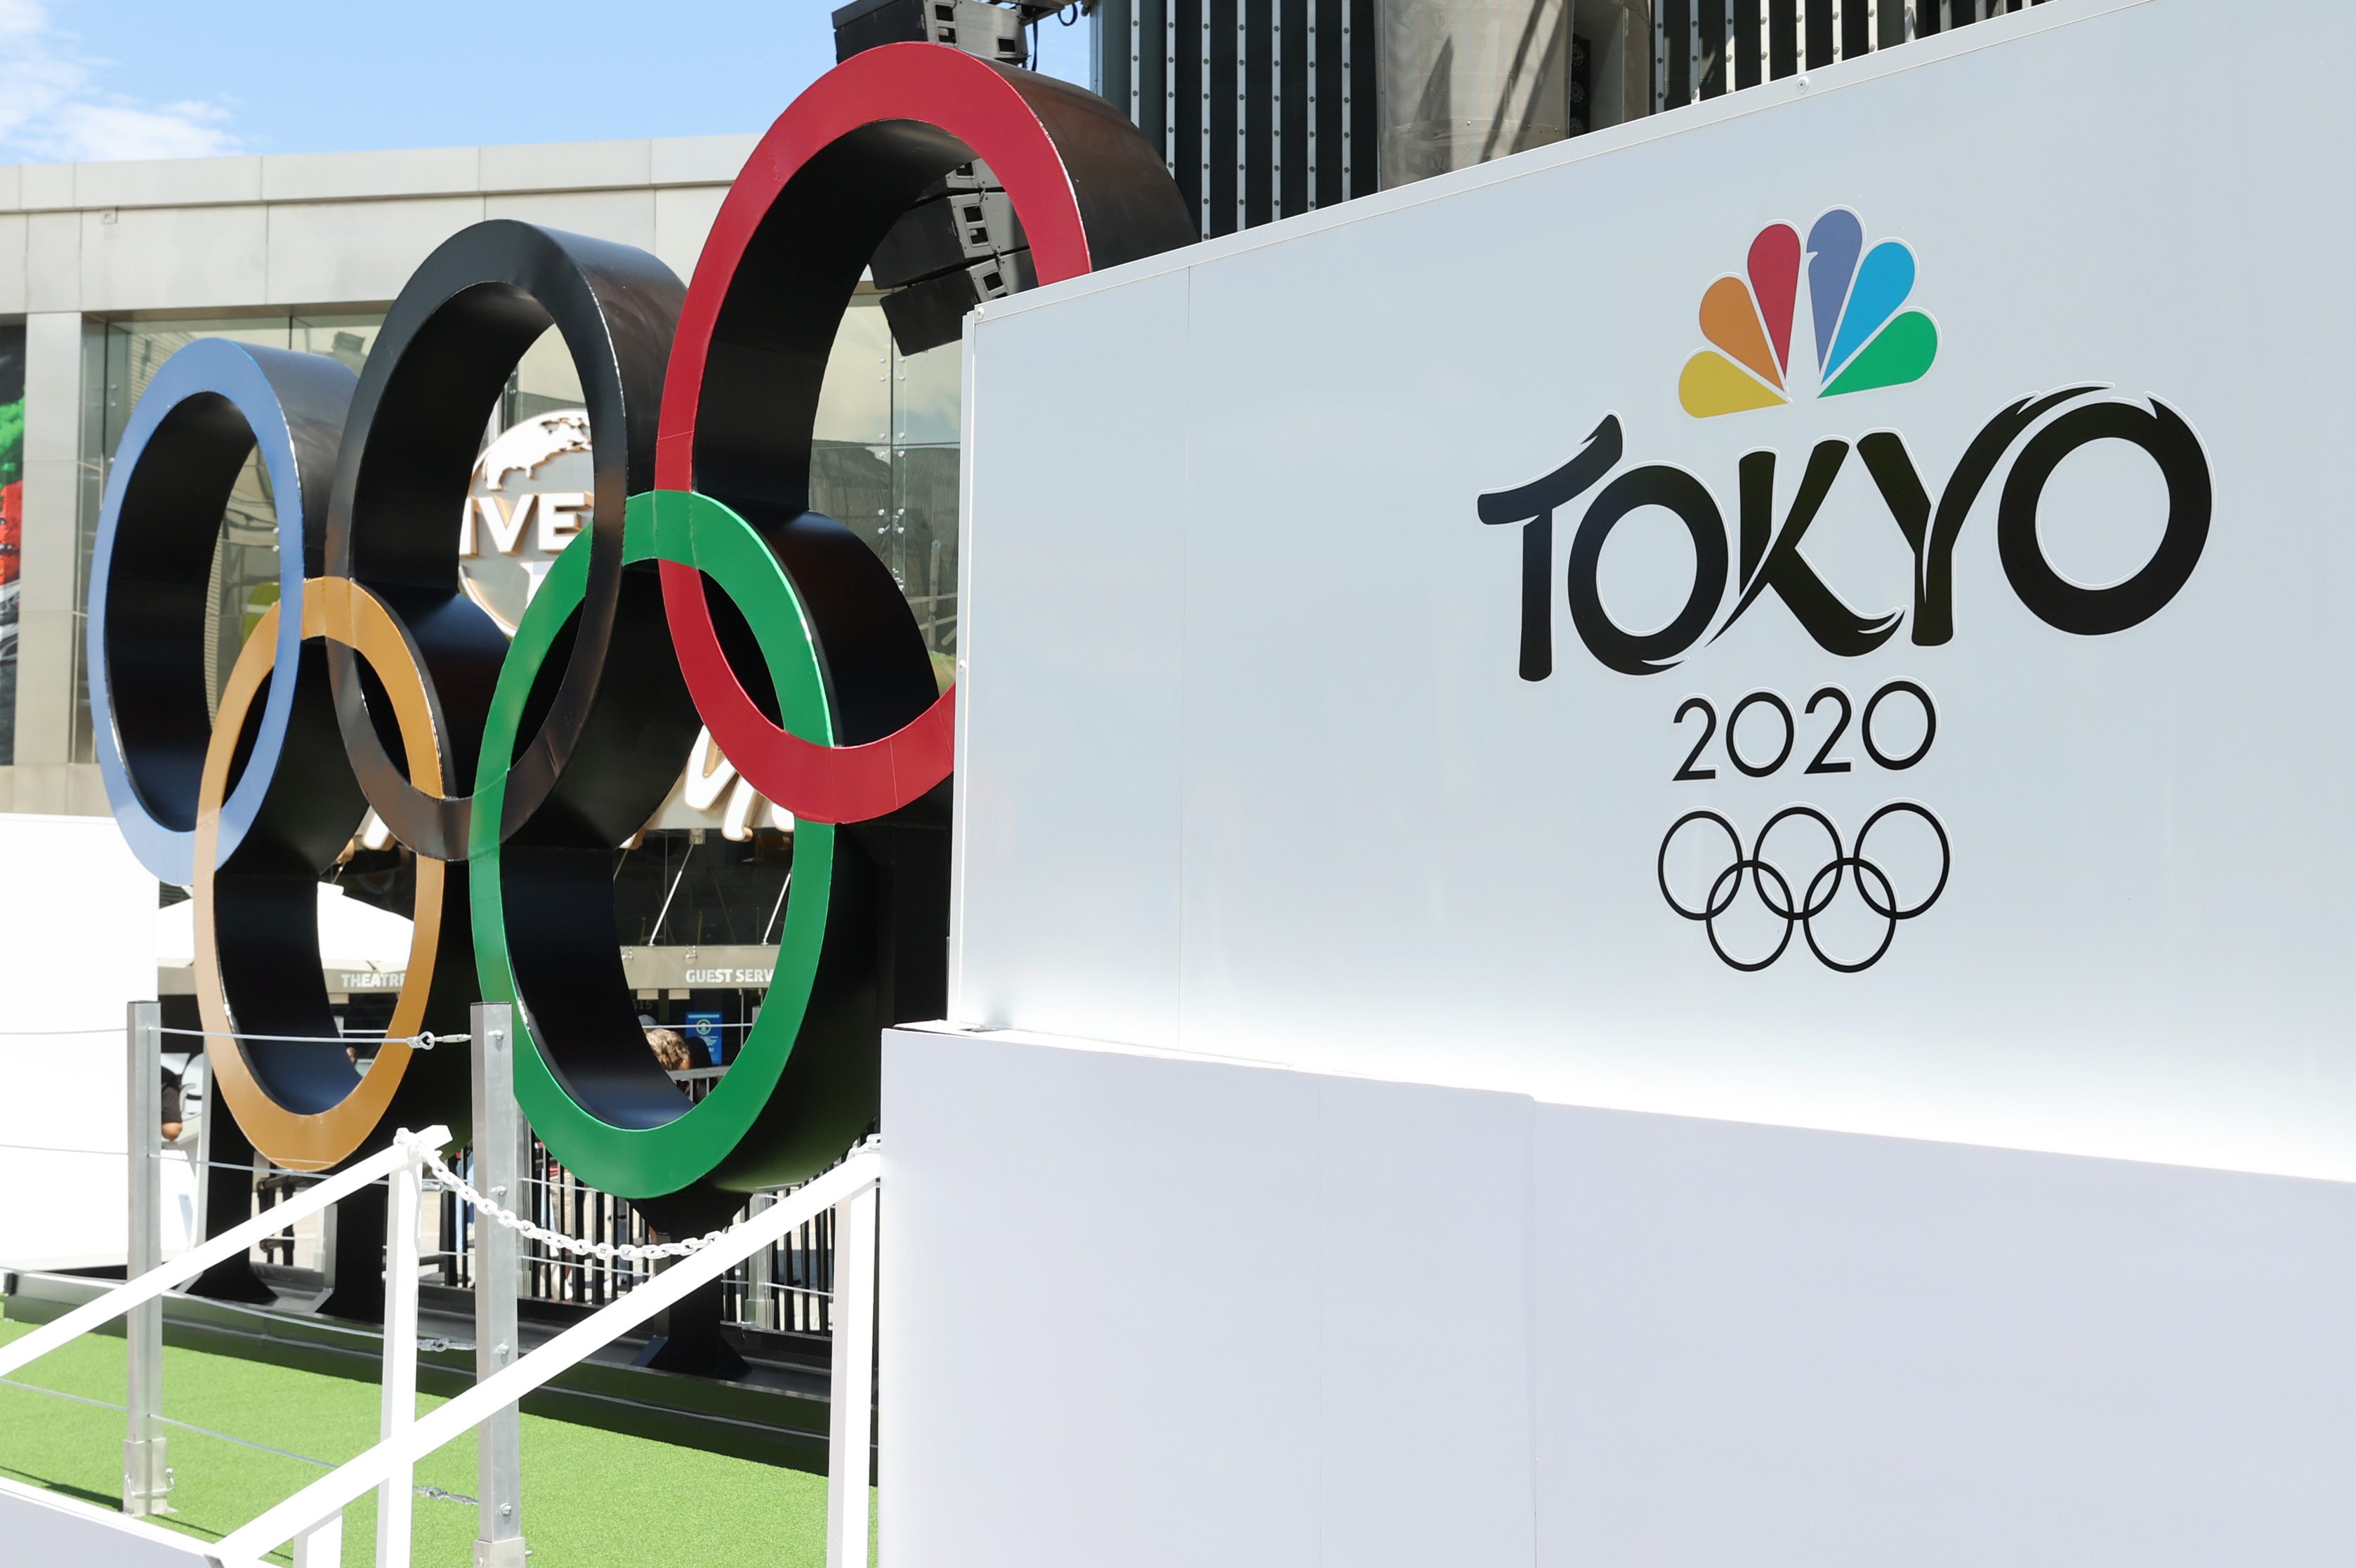 NBC logo at the Olympics. Ratings were severely down this year.